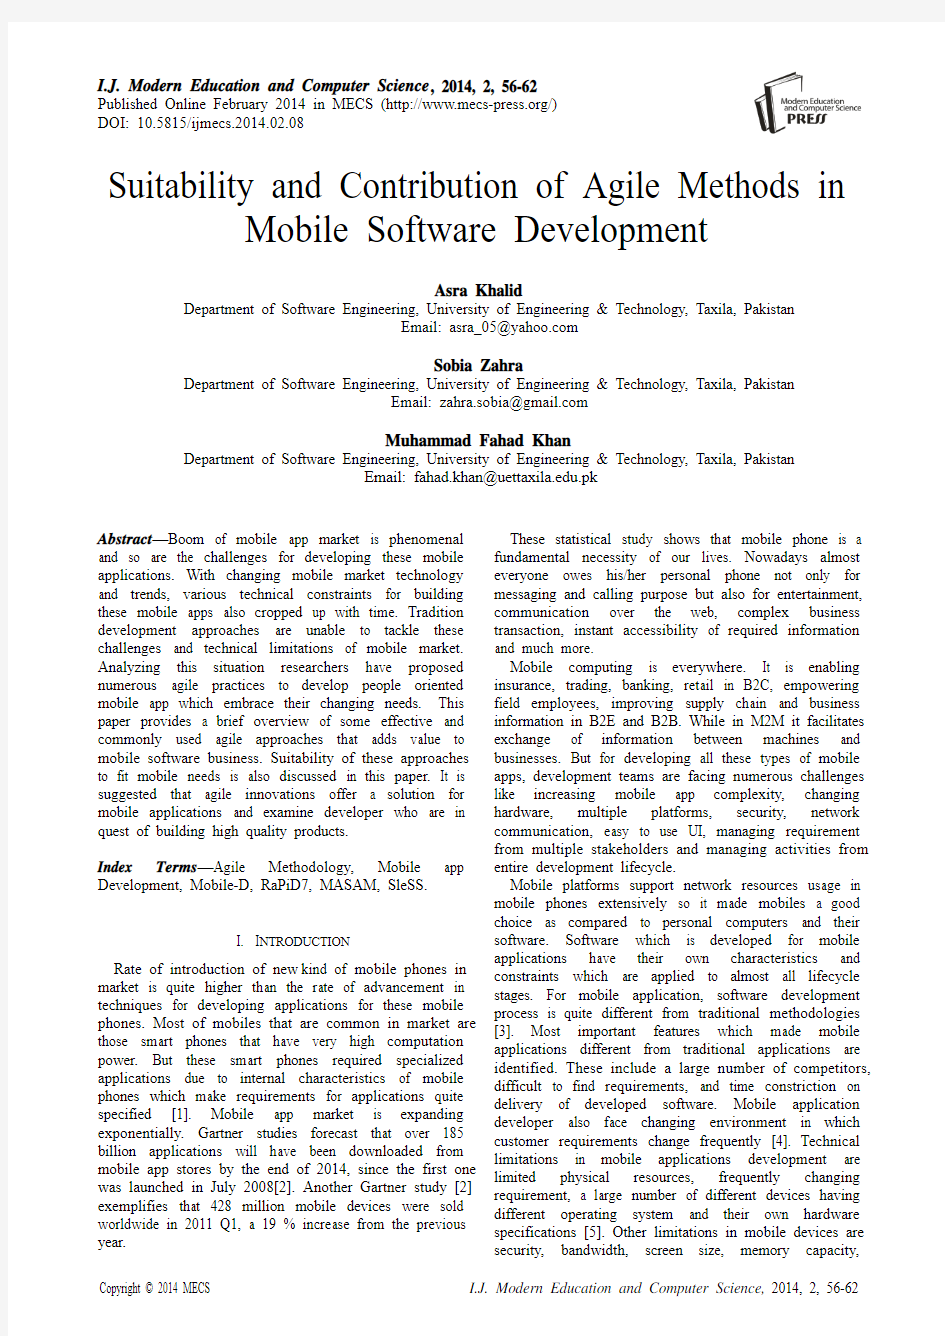 Suitability and Contribution of Agile Methods in Mobile Software Development(IJMECS-V6-N2-8)